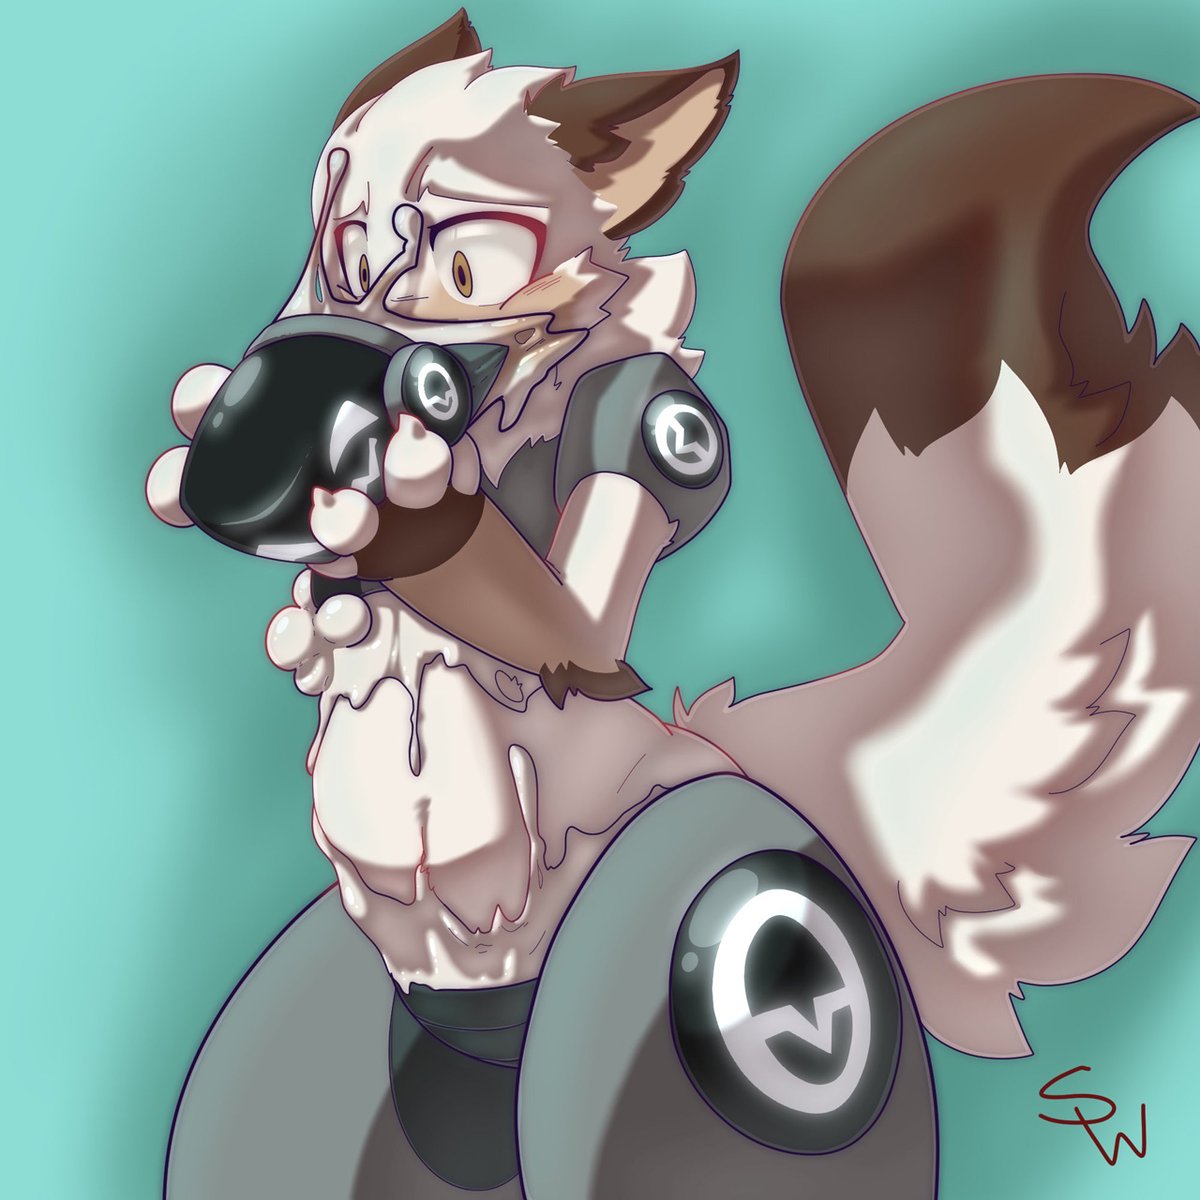 Dumb wuff thought it was a good idea to try sticking a protogen mask on the...